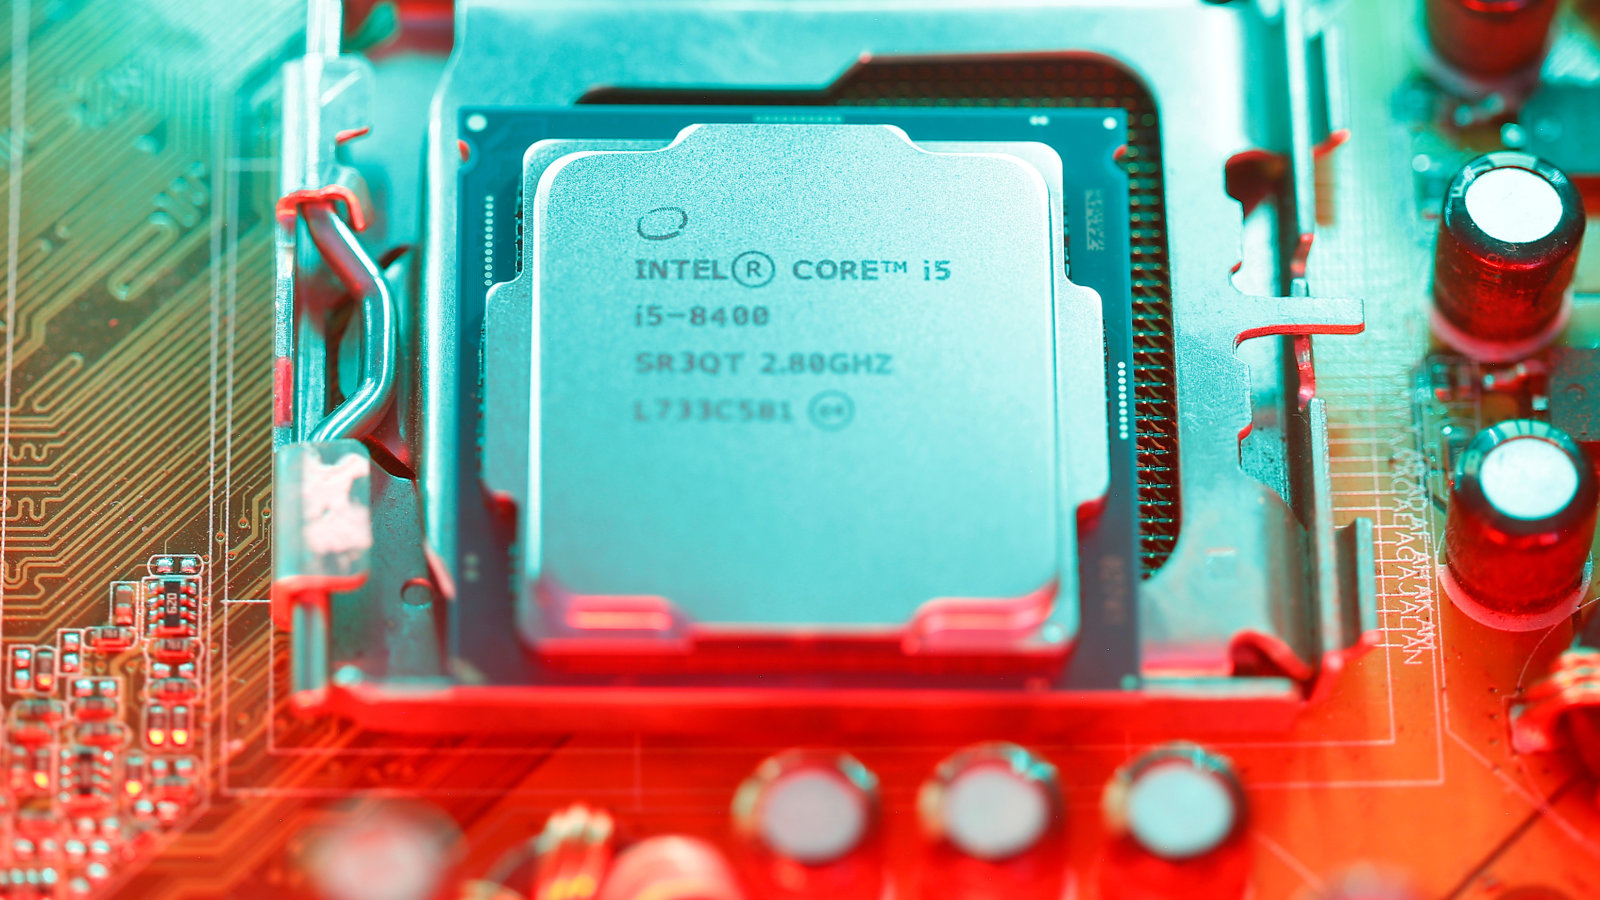 Intel's 8th generation Core i5 processor is seen on the computer's motherboard in this illustration taken January 5, 2018. REUTERS/Dado Ruvic/Illutration